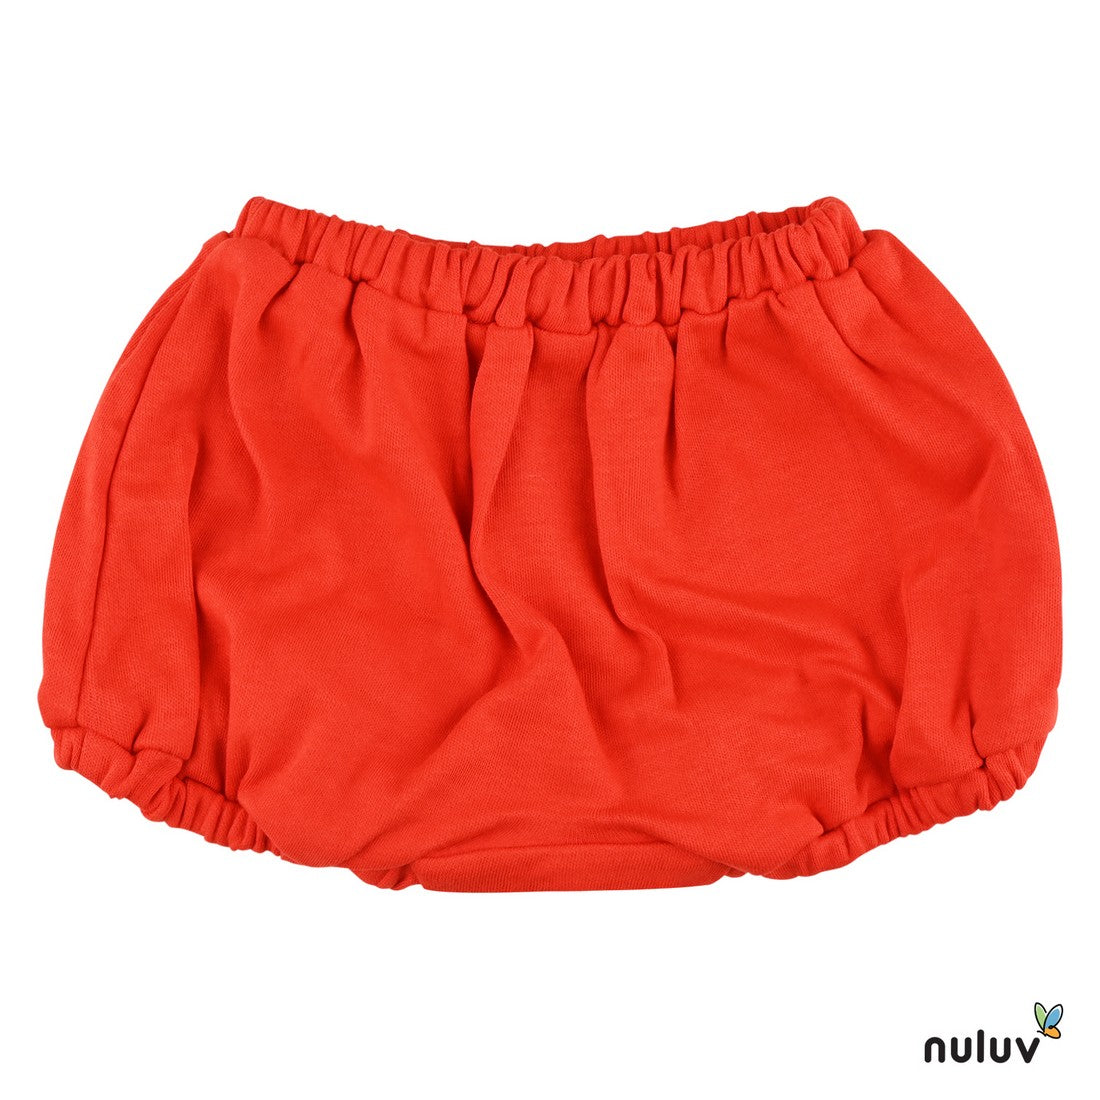 Nuluv Boys Brief - Style Bloomer